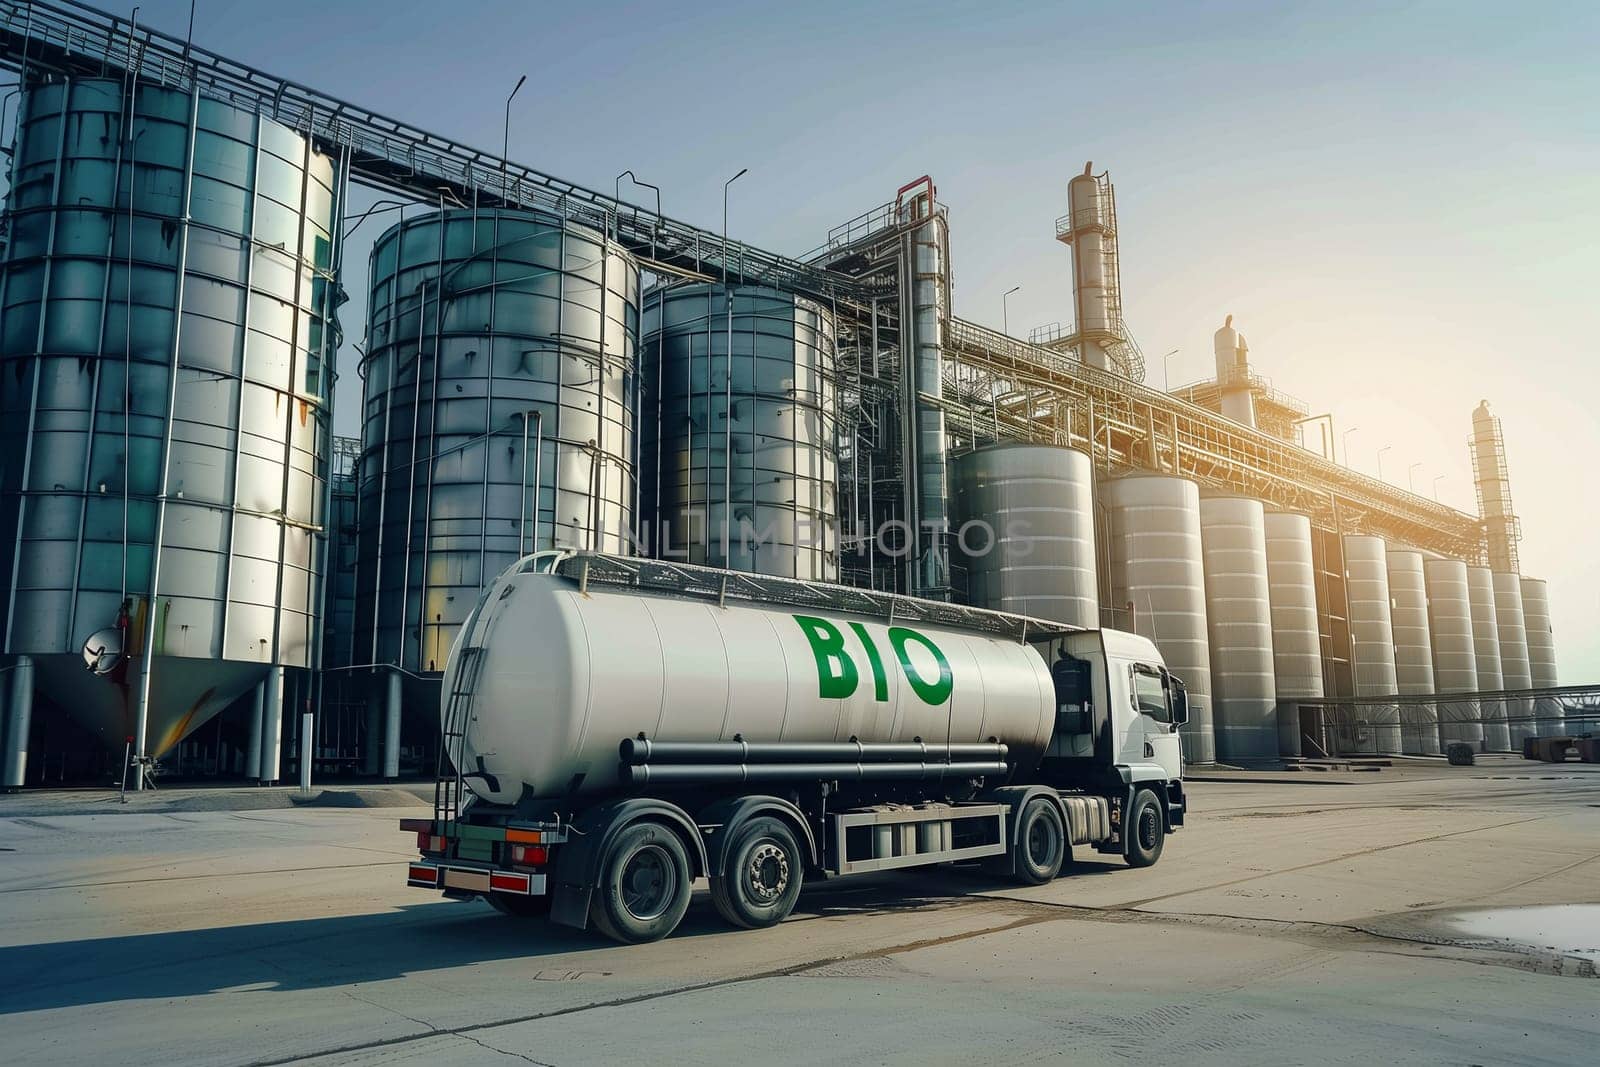 Biofuel Transport Truck Parked at Industrial Storage Facility During Sunset by Sd28DimoN_1976